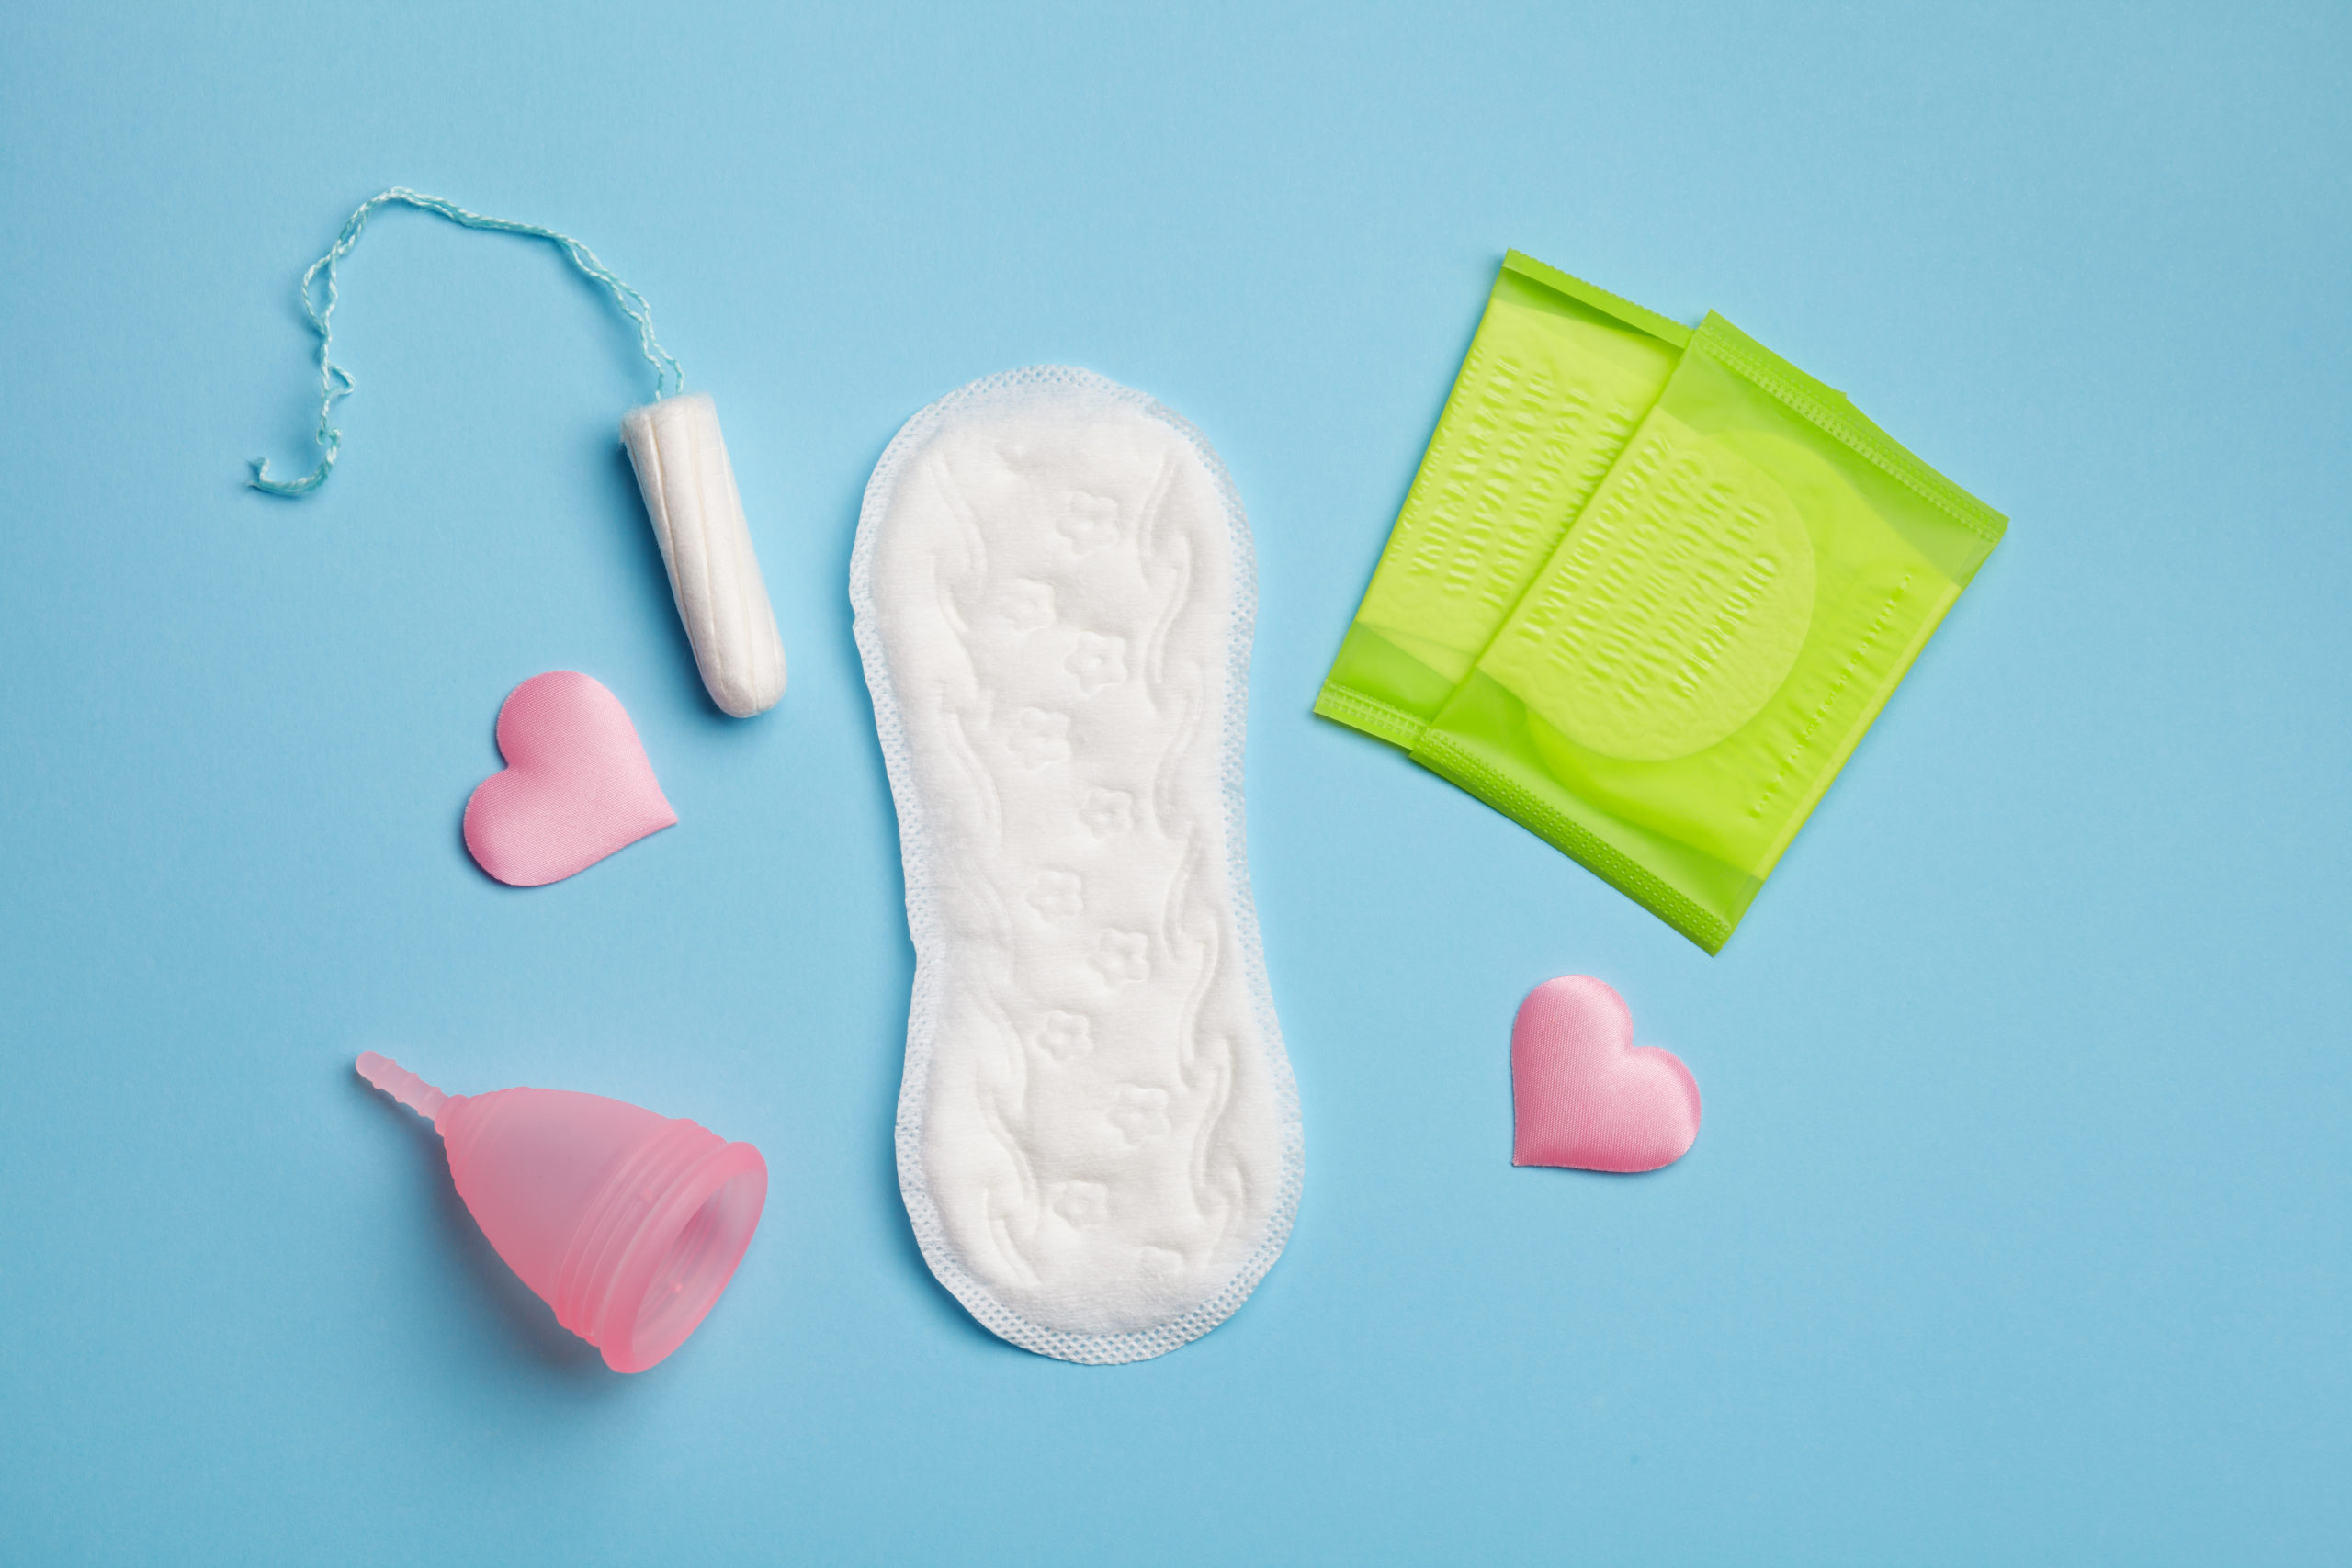 Period products such as tampons and pads are now free to anyone in Scotland that needs them. This law was passed yesterday, two years after Parliament approved the legislation. 